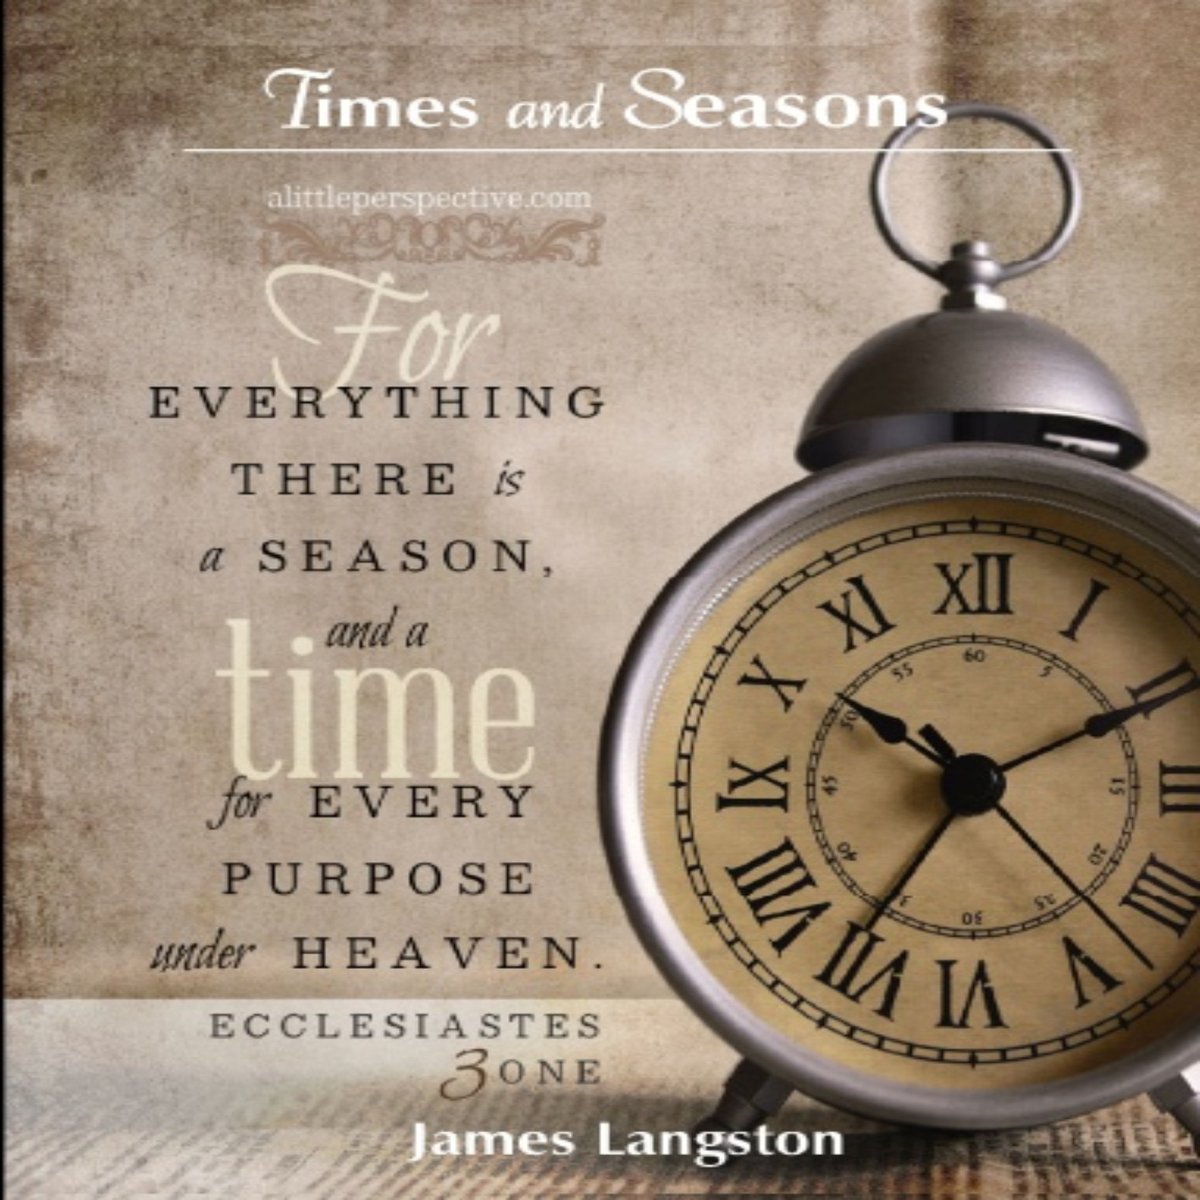 'Times and Seasons' (Book Preview/James Langston) [zurl.co/X5kU] Every moment holds a purpose in life's grand tapestry. #Inspiration #Motivation #Life'sRhythms #BookTeaser #SeizeTheMoment #ConsequencesOfChoice